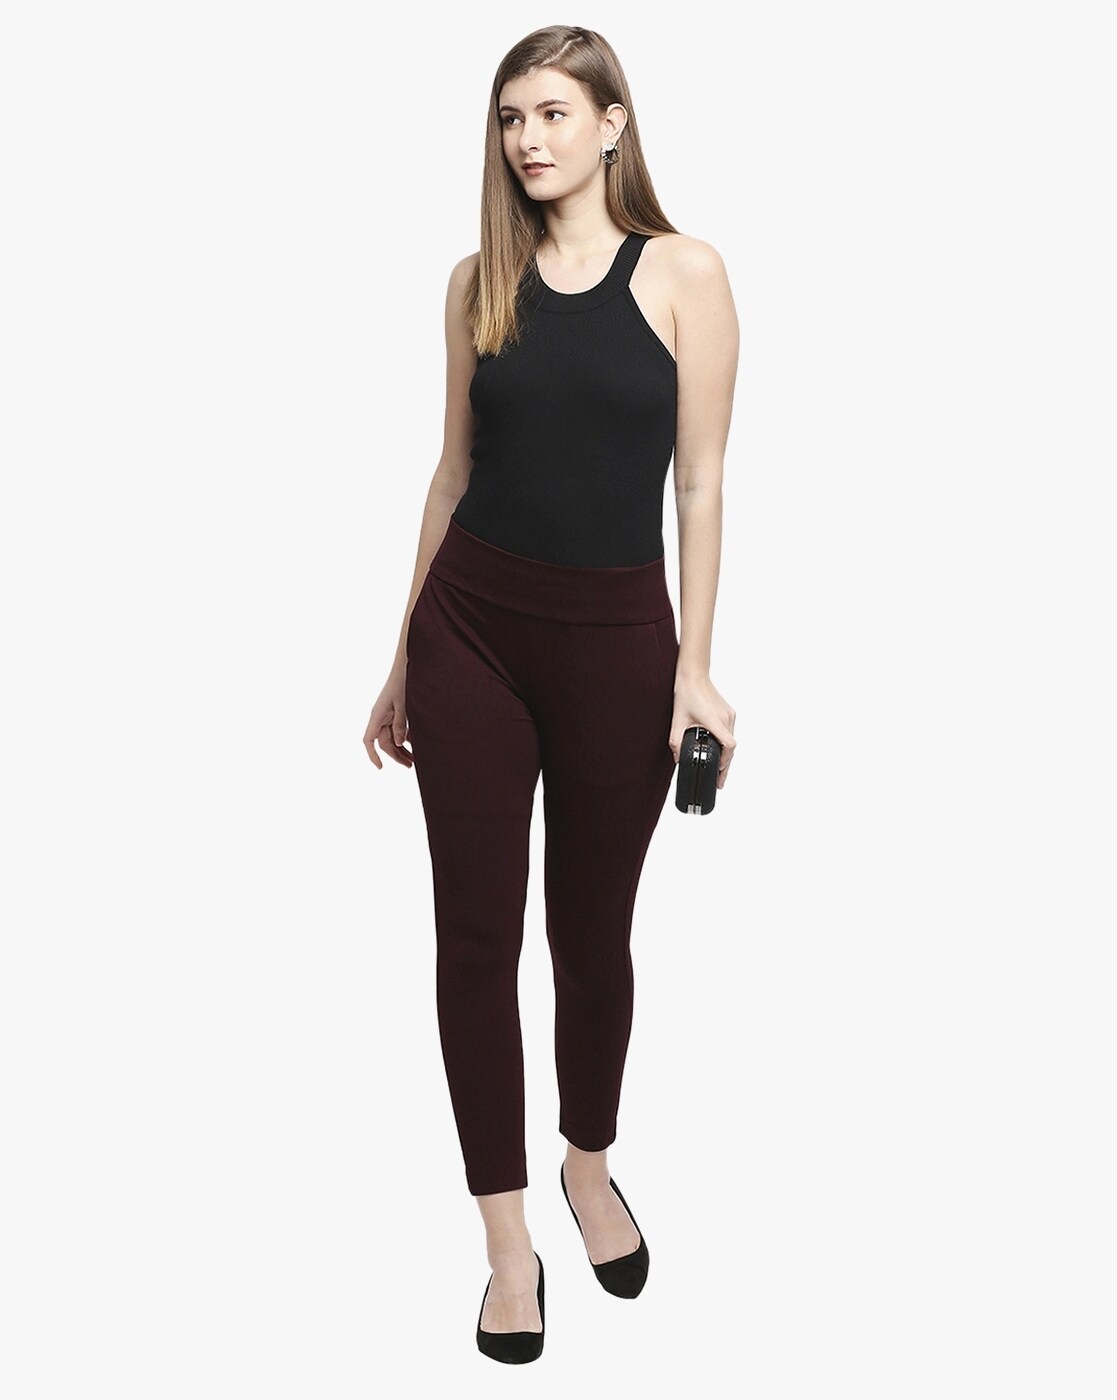 AW87 Super Combed Cotton Elastane Stretch Leggings with Ultrasoft Waistband